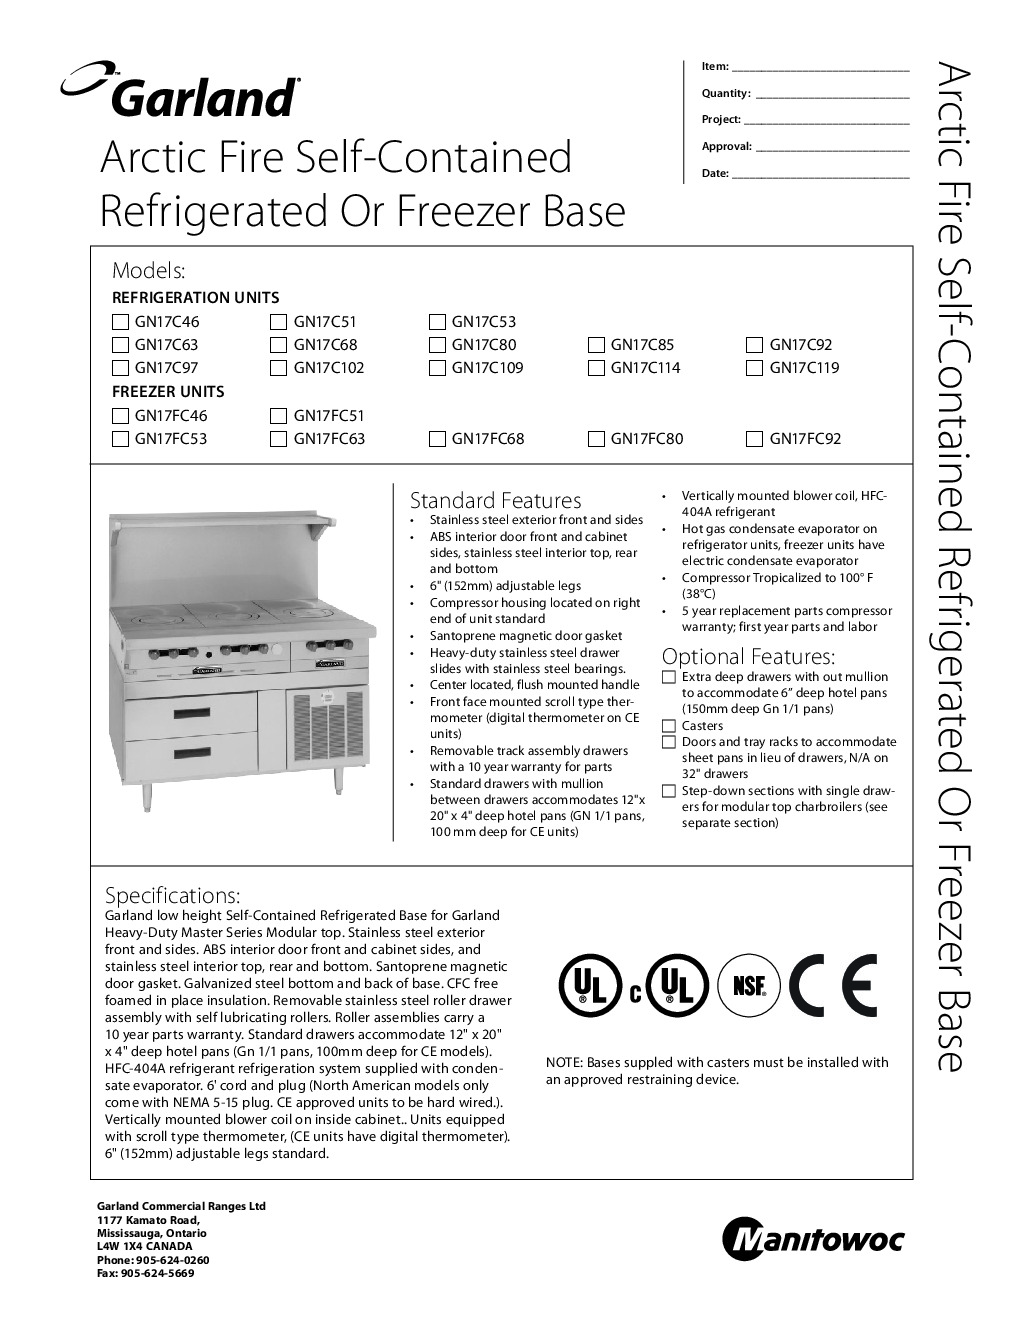 Garland US Range GN17C102 Refrigerated Base Equipment Stand